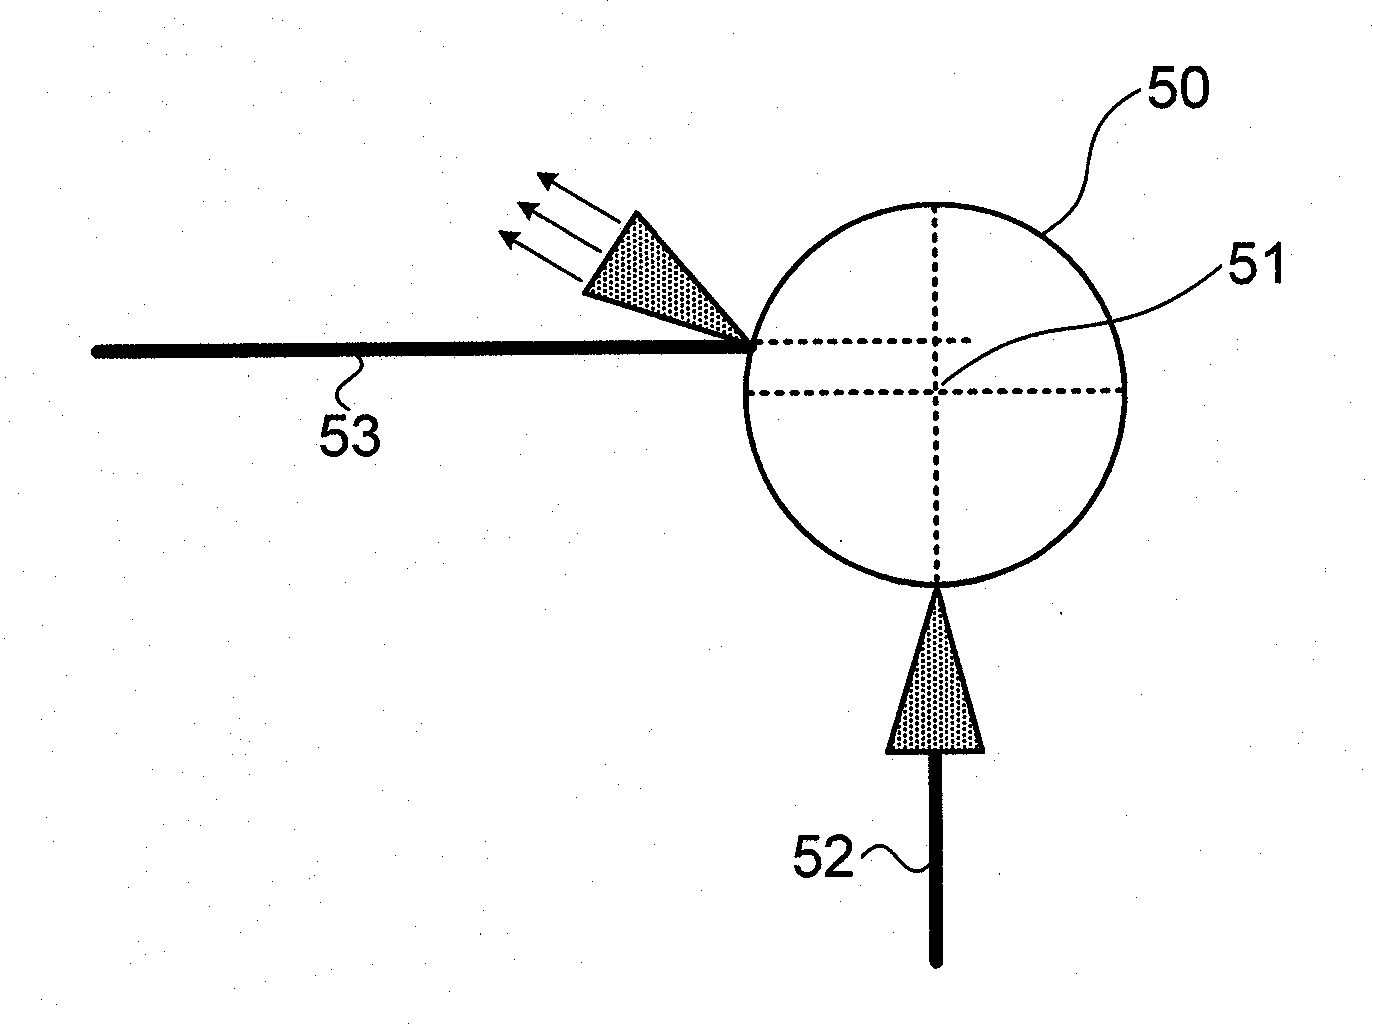 Spatially distributed laser resonator